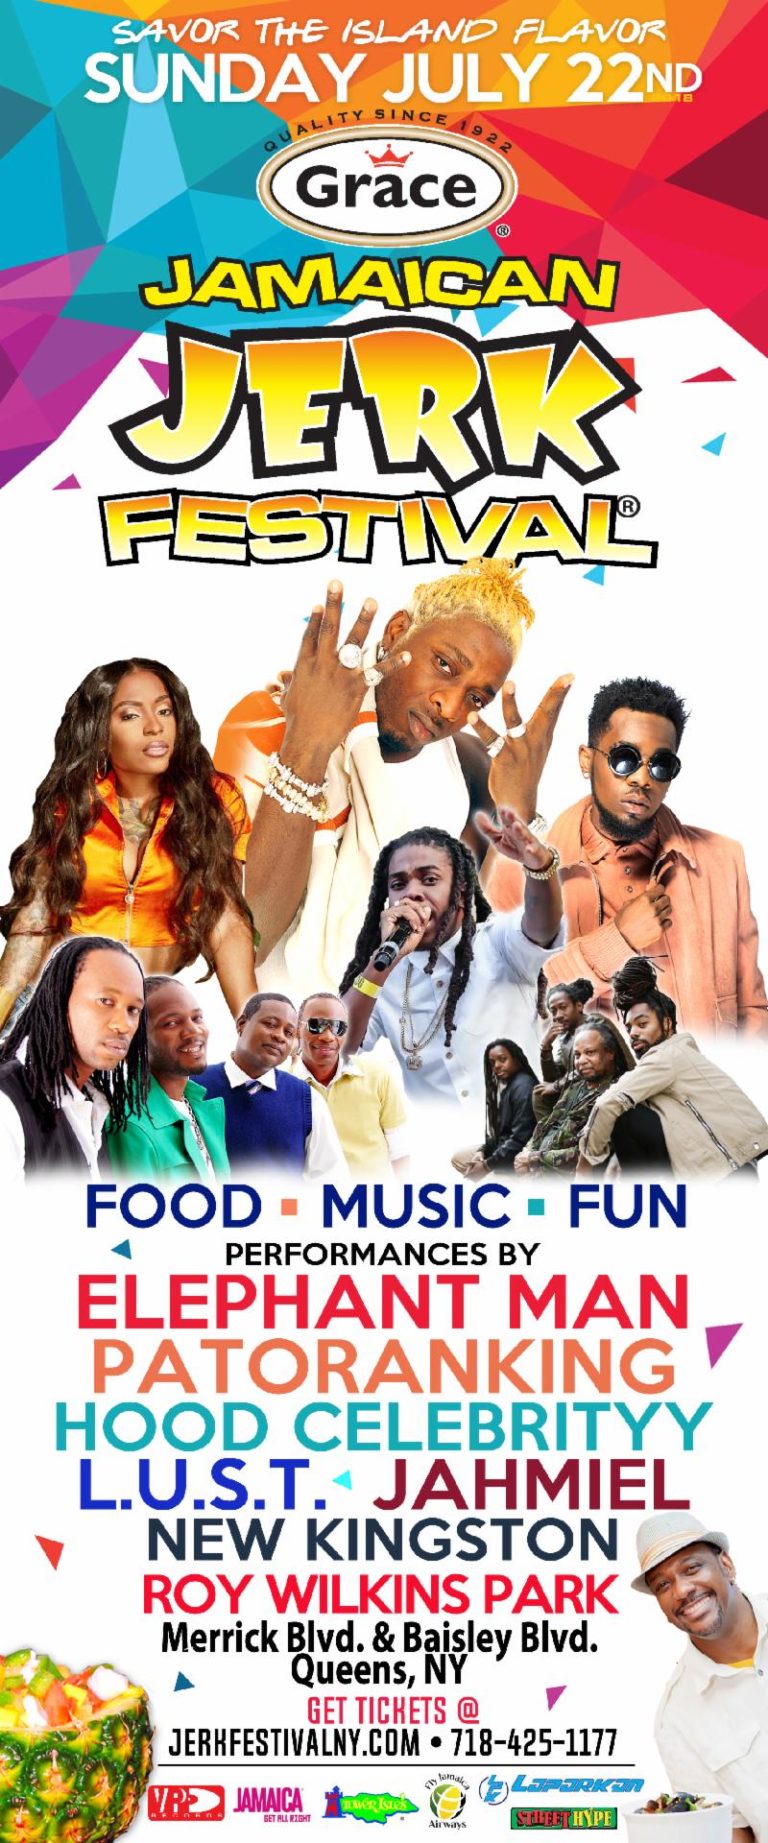 EIGHTH STAGING OF GRACE JAMAICAN JERK FESTIVAL HITS NEW YORK JULY 22nd